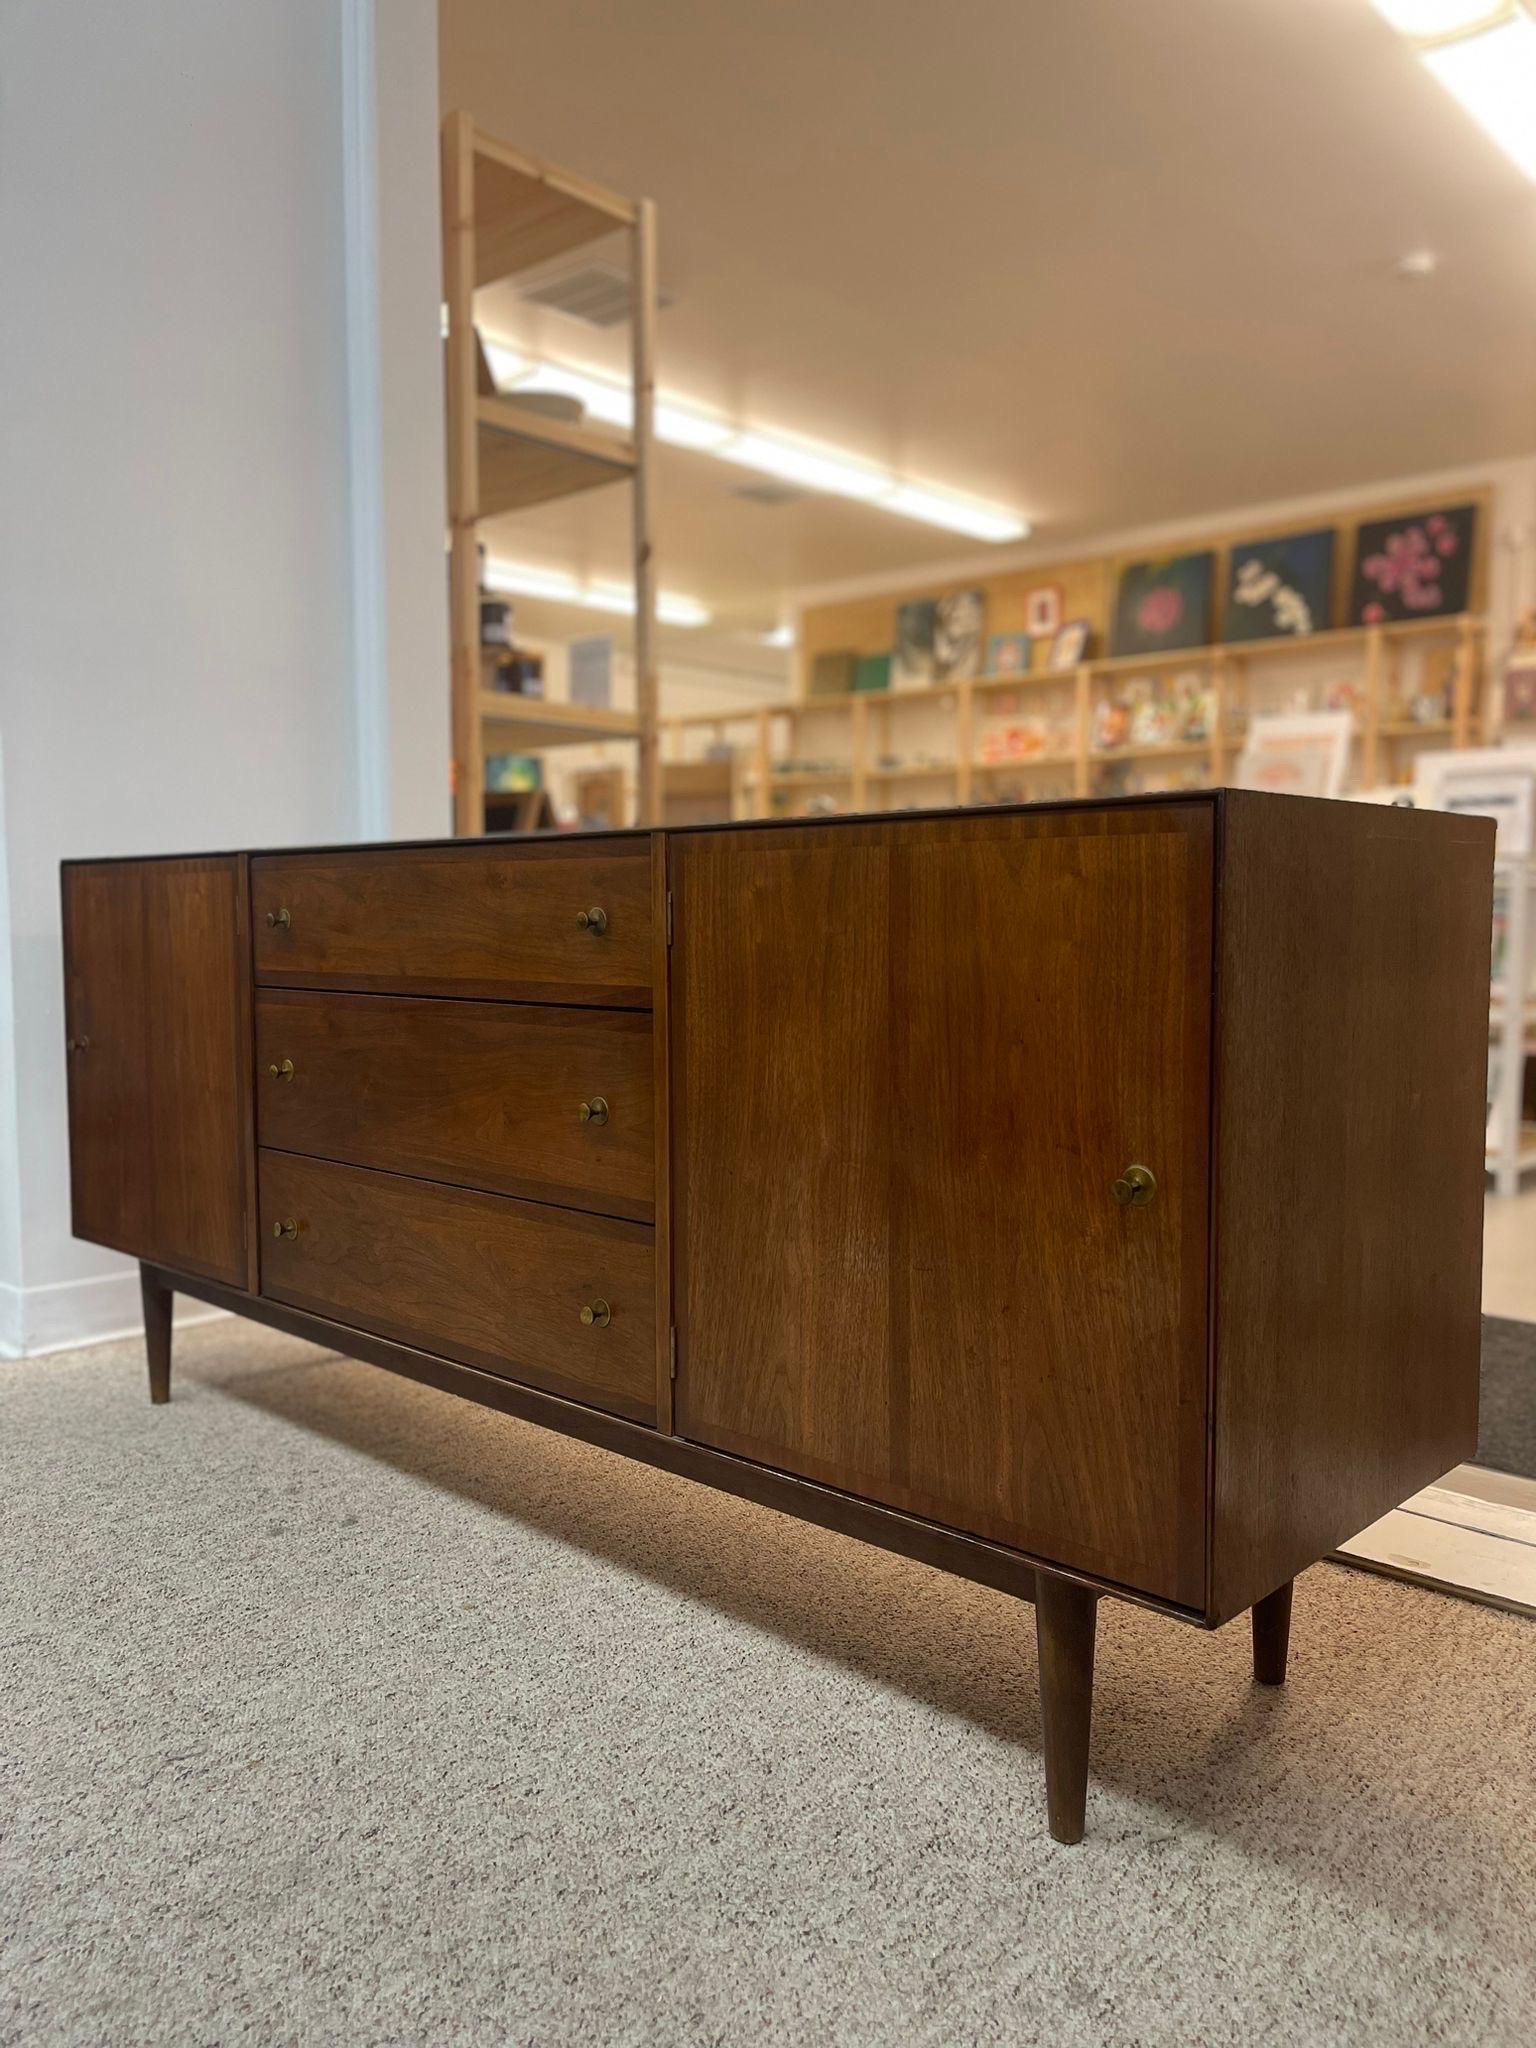 The Subtle Details of this Dresser Make it Incredibly Unique.Three Drawers, the Tipt Drawer Includes Dividers.Mid Century Modern Style with Tapered Legs and Dark Toned Wood.Makers Mark Inside Cabinet as Pictured. Dovetail Drawers.

Dimensions  70 W